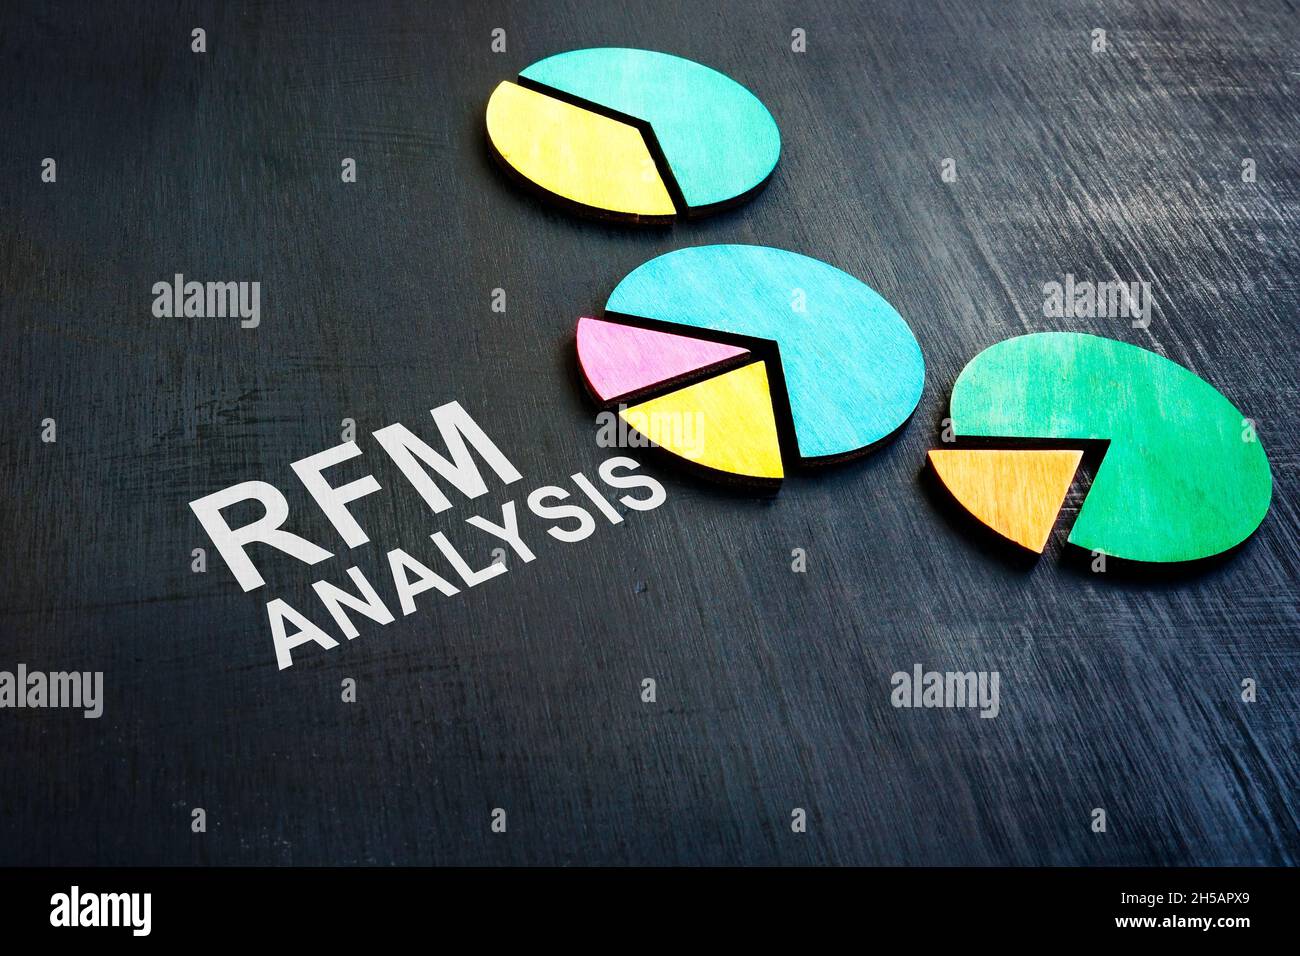 RFM Recency, Frequency, Monetary Analysis Words e business chart. Foto Stock